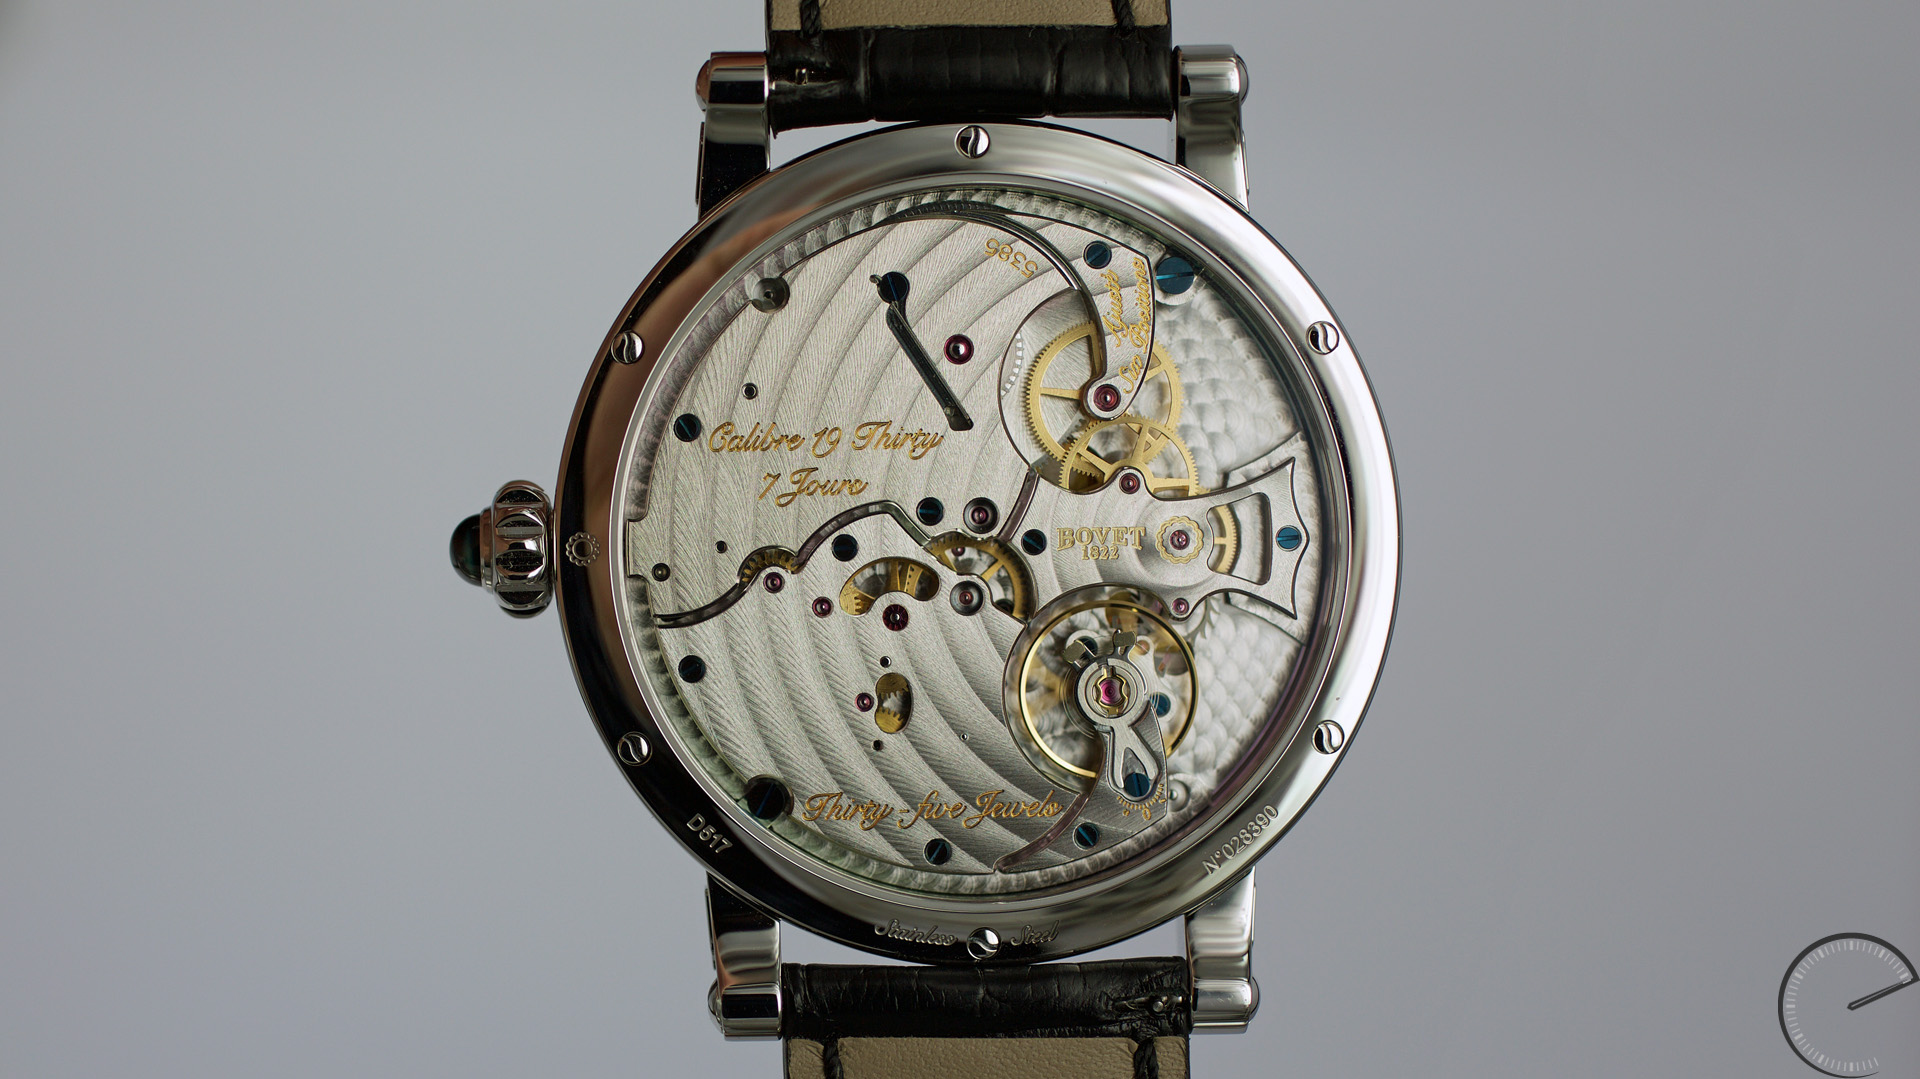 Bovet 19 Thirty with Dimier case - ESCAPEMENT magazine by Angus Davies